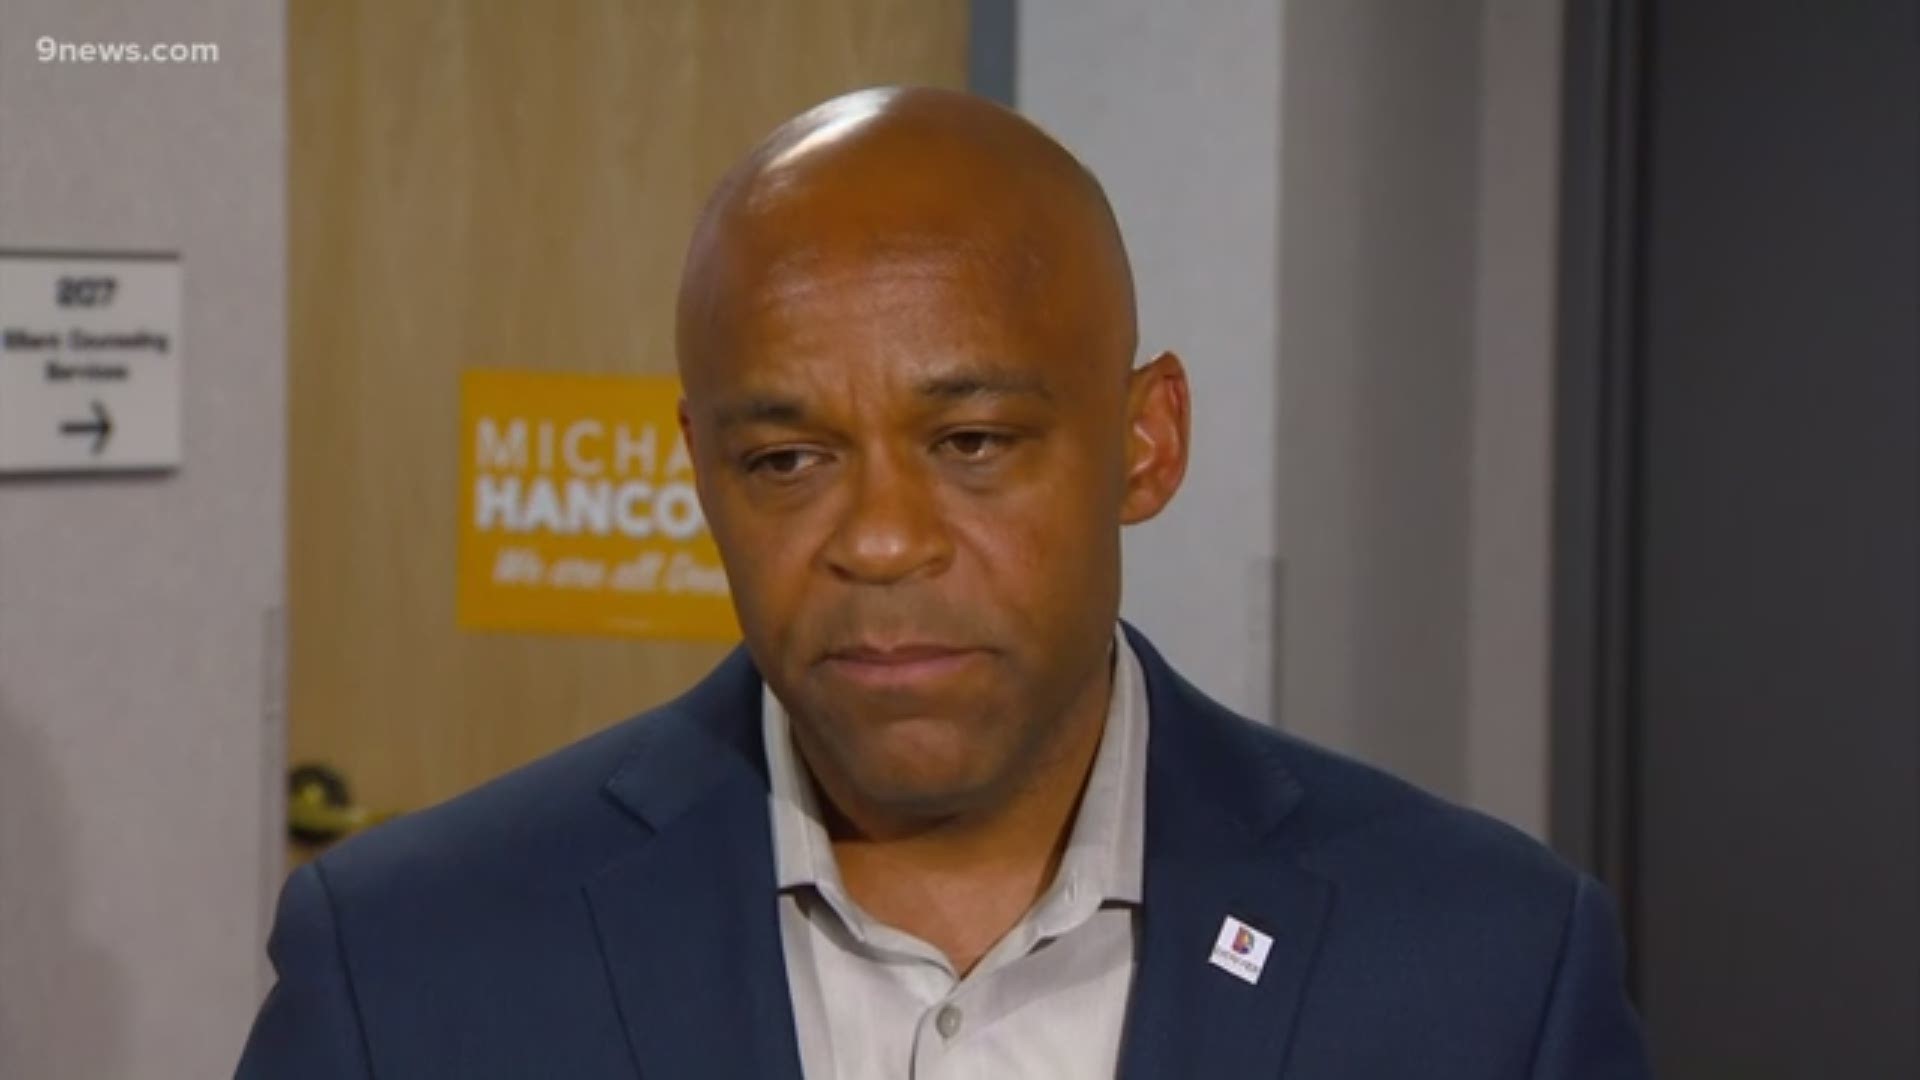 Mayor Michael Hancock publicly apologized for comments he made during a debate Tuesday night regarding sexual harassment accusations against him.